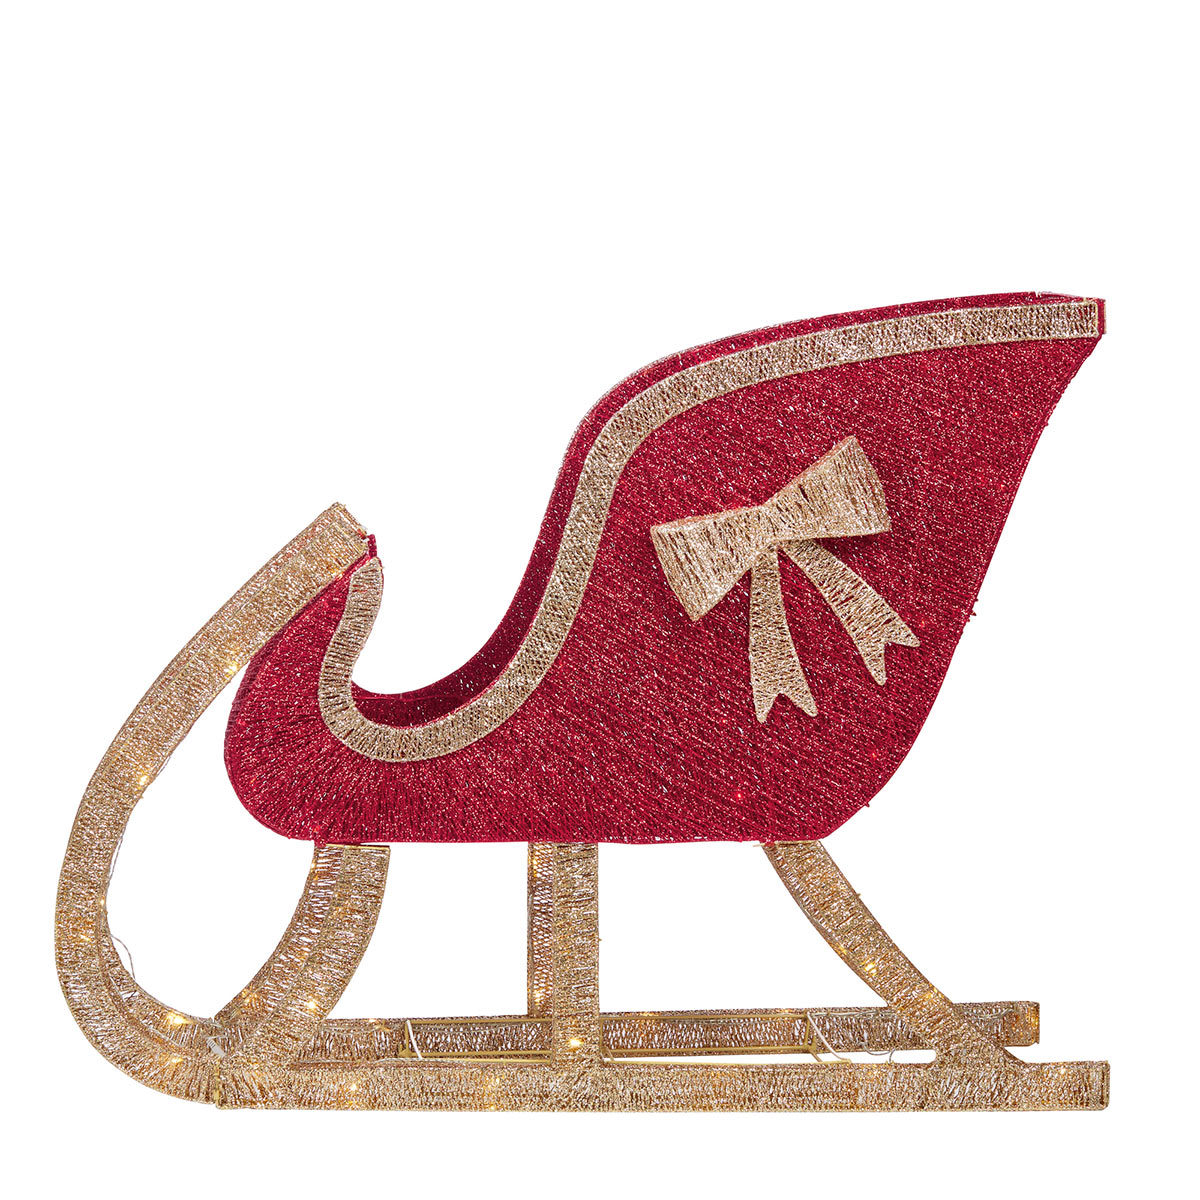 View of a sleigh facing the left on a white background